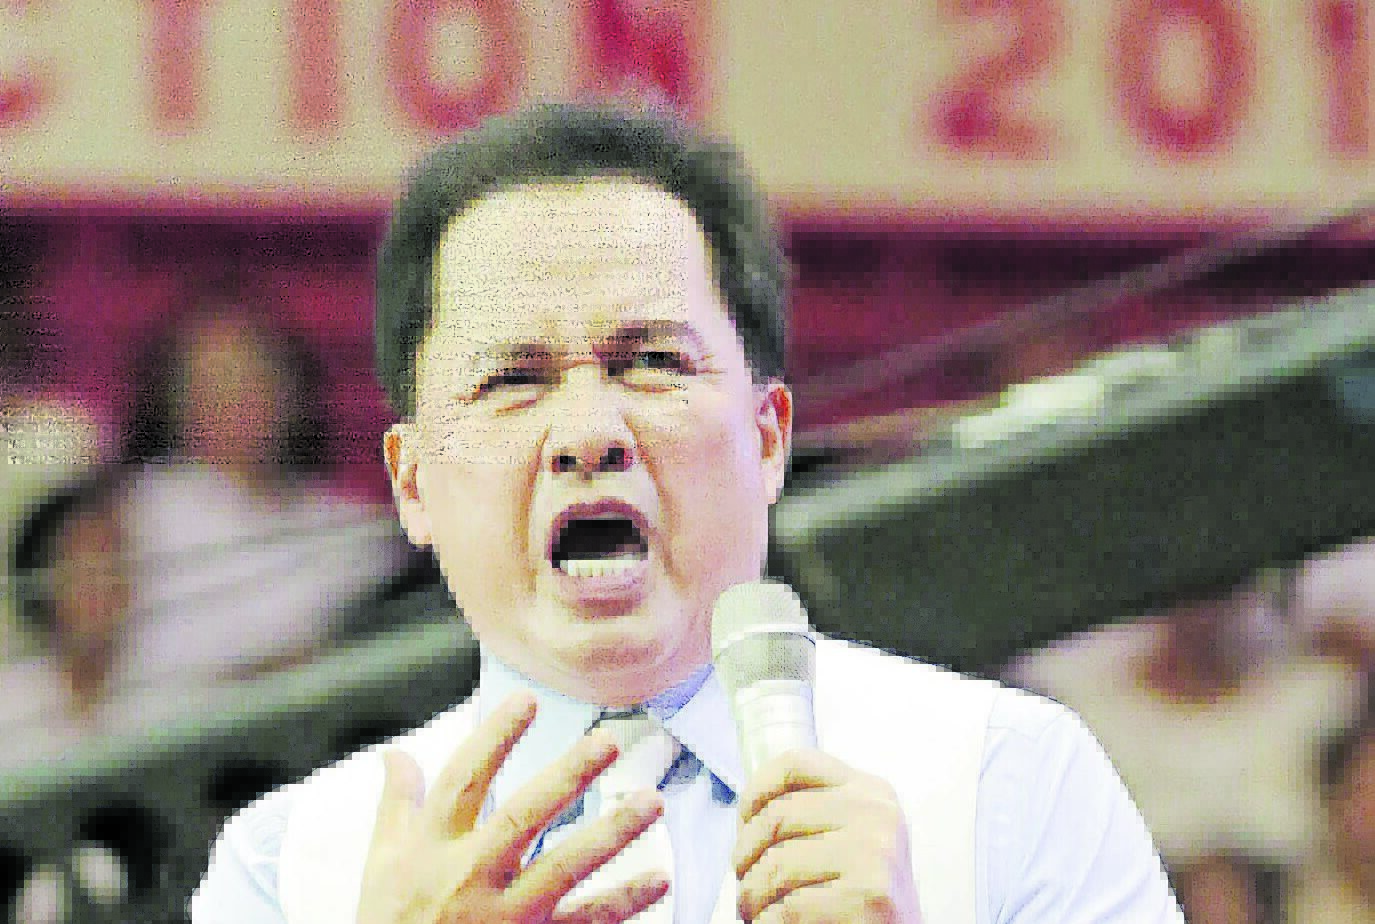 Hunt on for Quiboloy: ‘No special treatment’